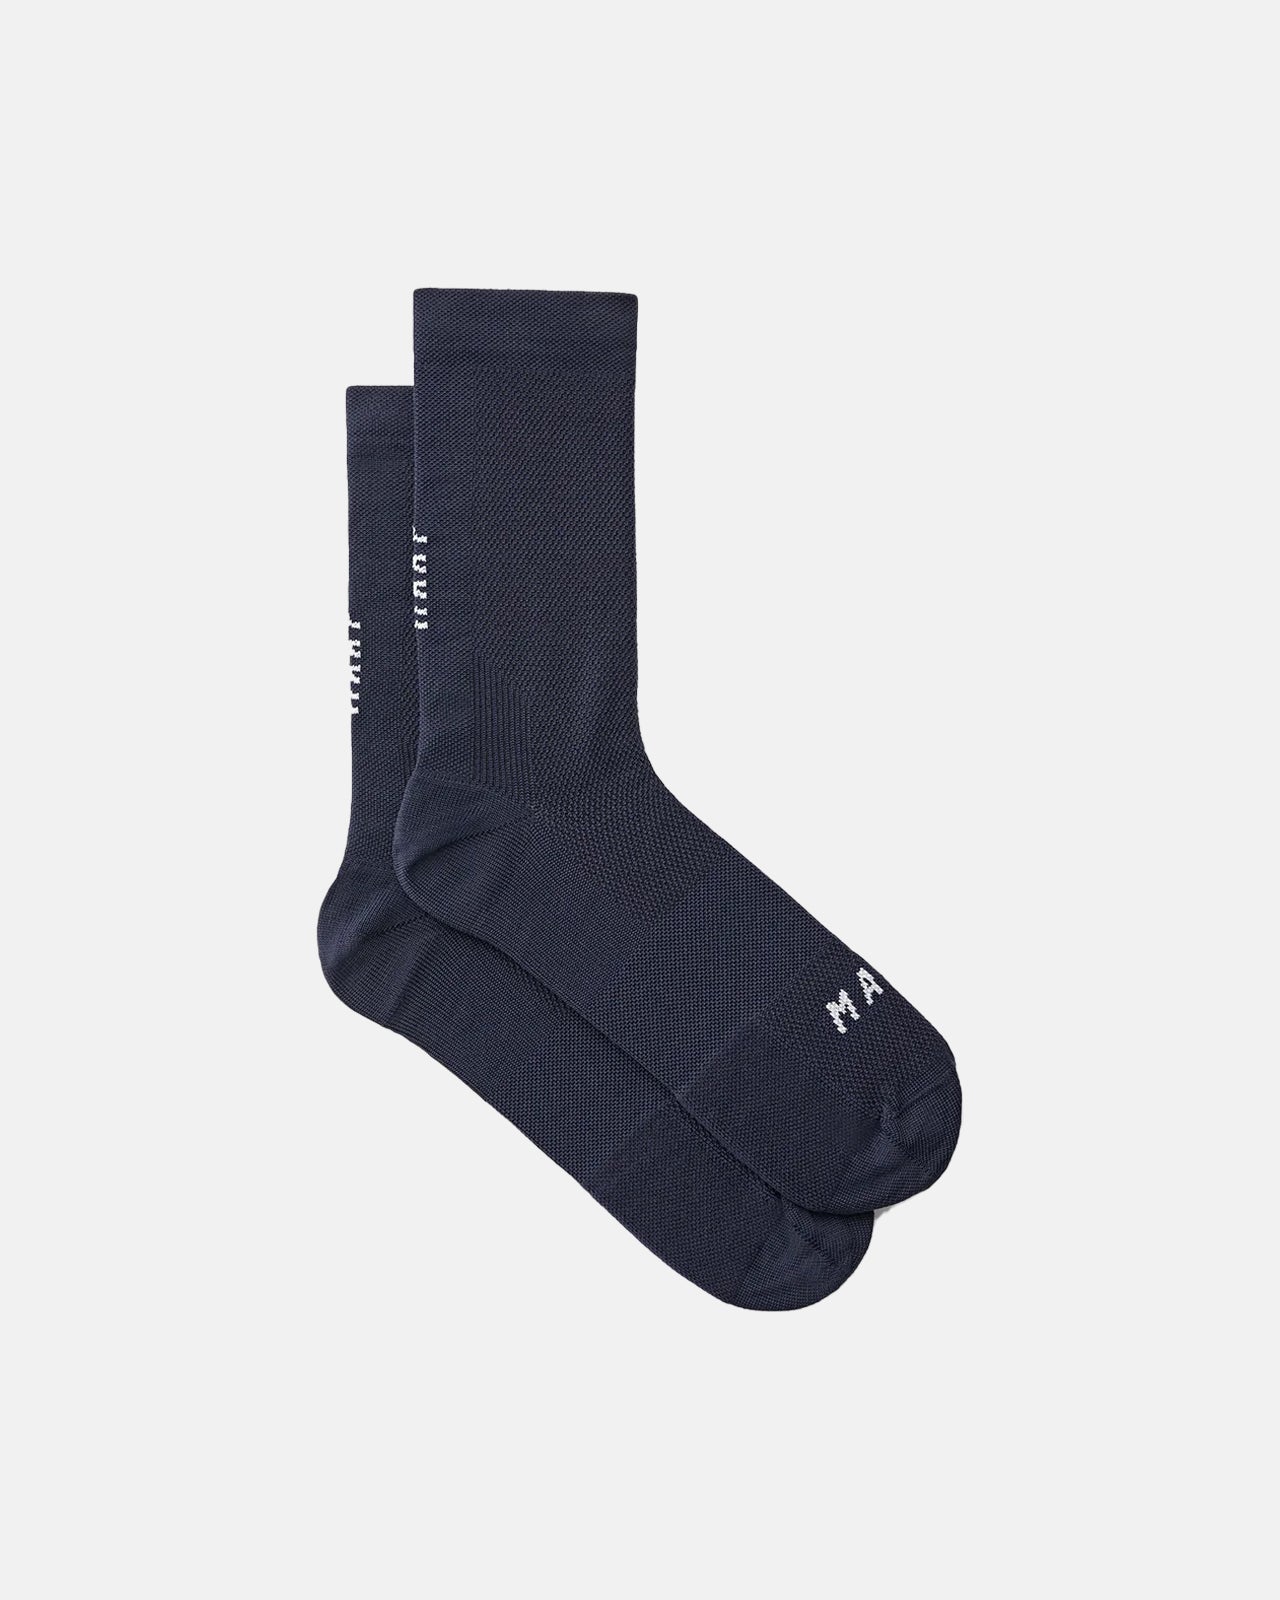 MAAP Division Sock - Antarctica exclusive at Enroute.cc